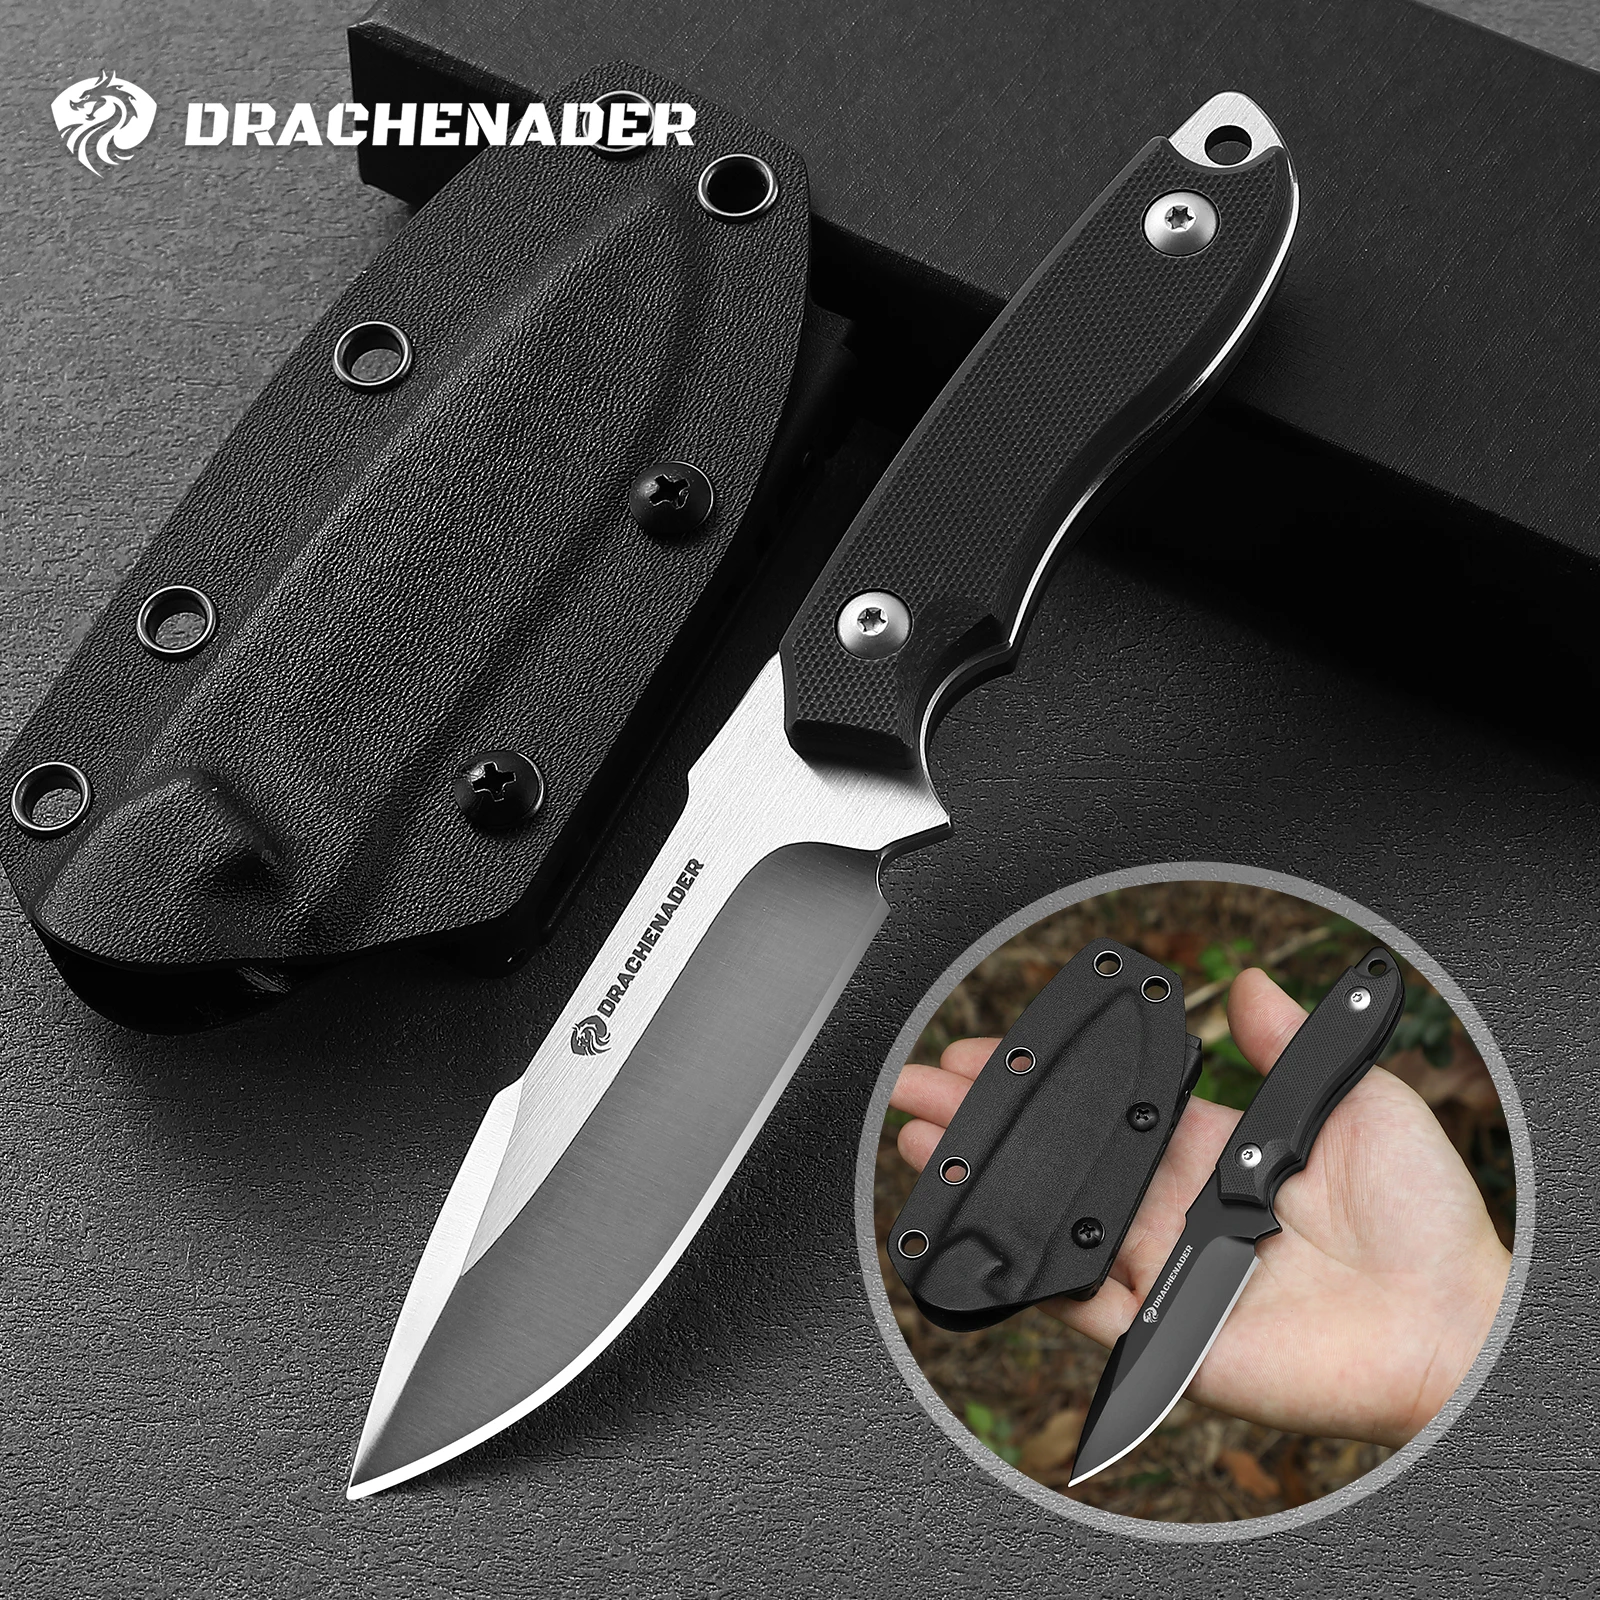 

D2 Steel Tactical Knife, Survival Hunting Knife With Kydex Sheath, G10 Handle Full Tang, EDC Outdoor Camping Fixed Blade Knives